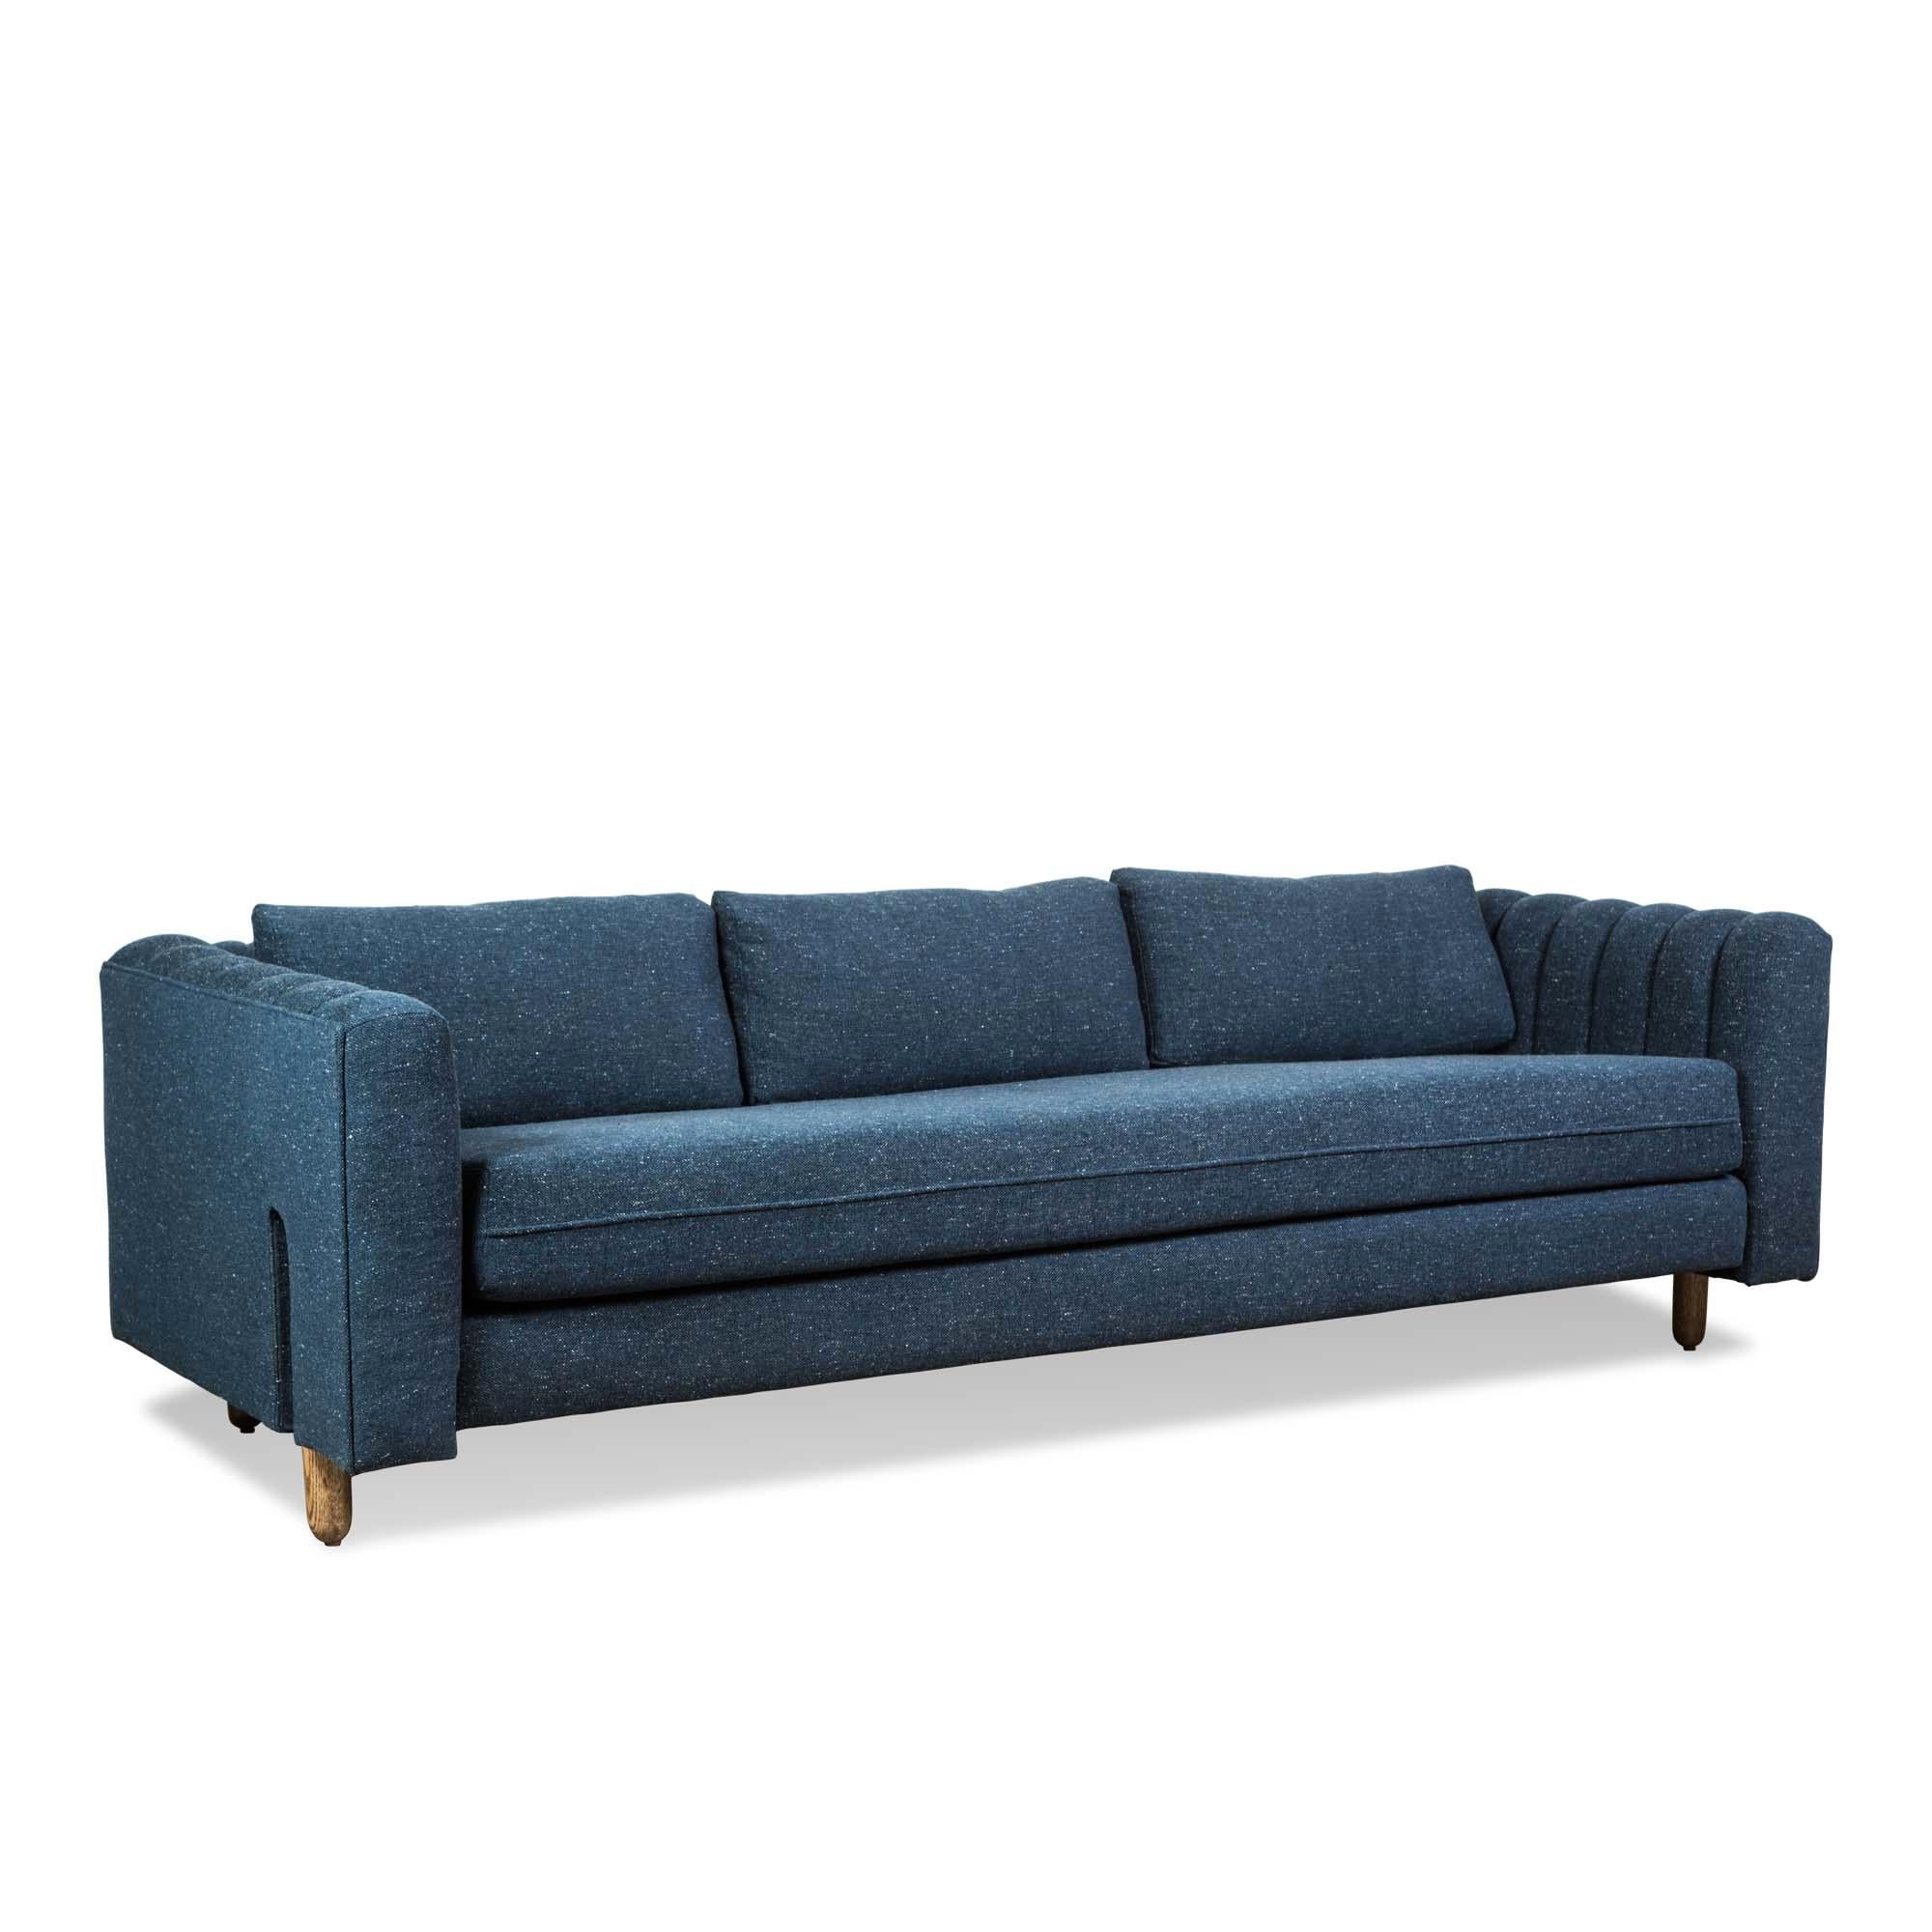 The Isherwood sofa features a channel tufted body with loose bolster cushions. The turned legs are made of solid white oak or American walnut and are inset on the sides revealing the leg detail. 

The Lawson-Fenning Collection is designed and